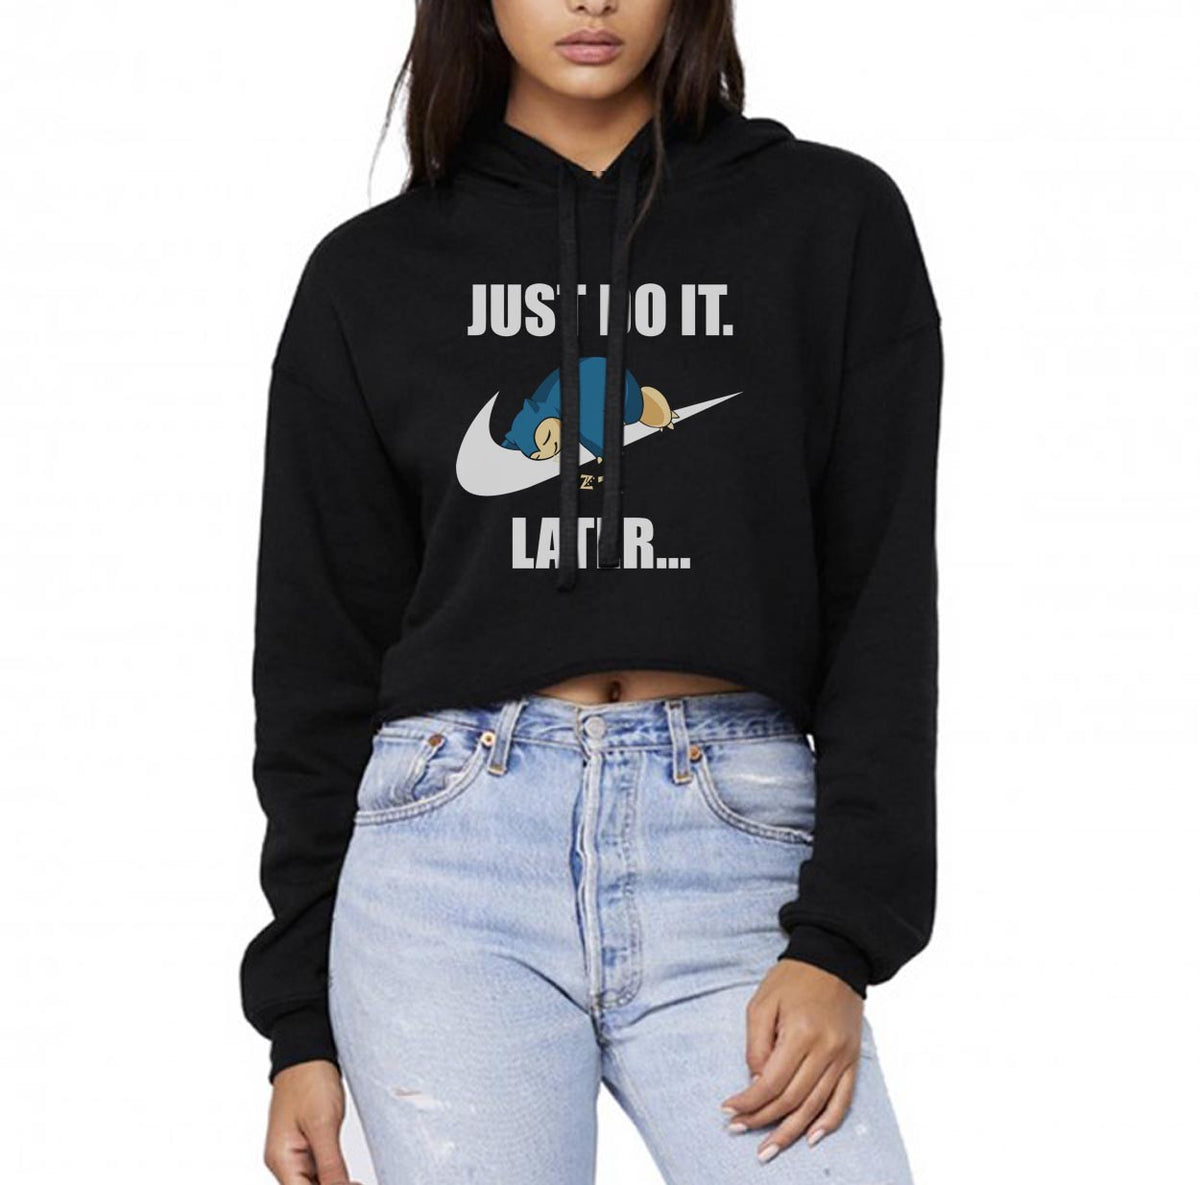 just do it later snorlax hoodie